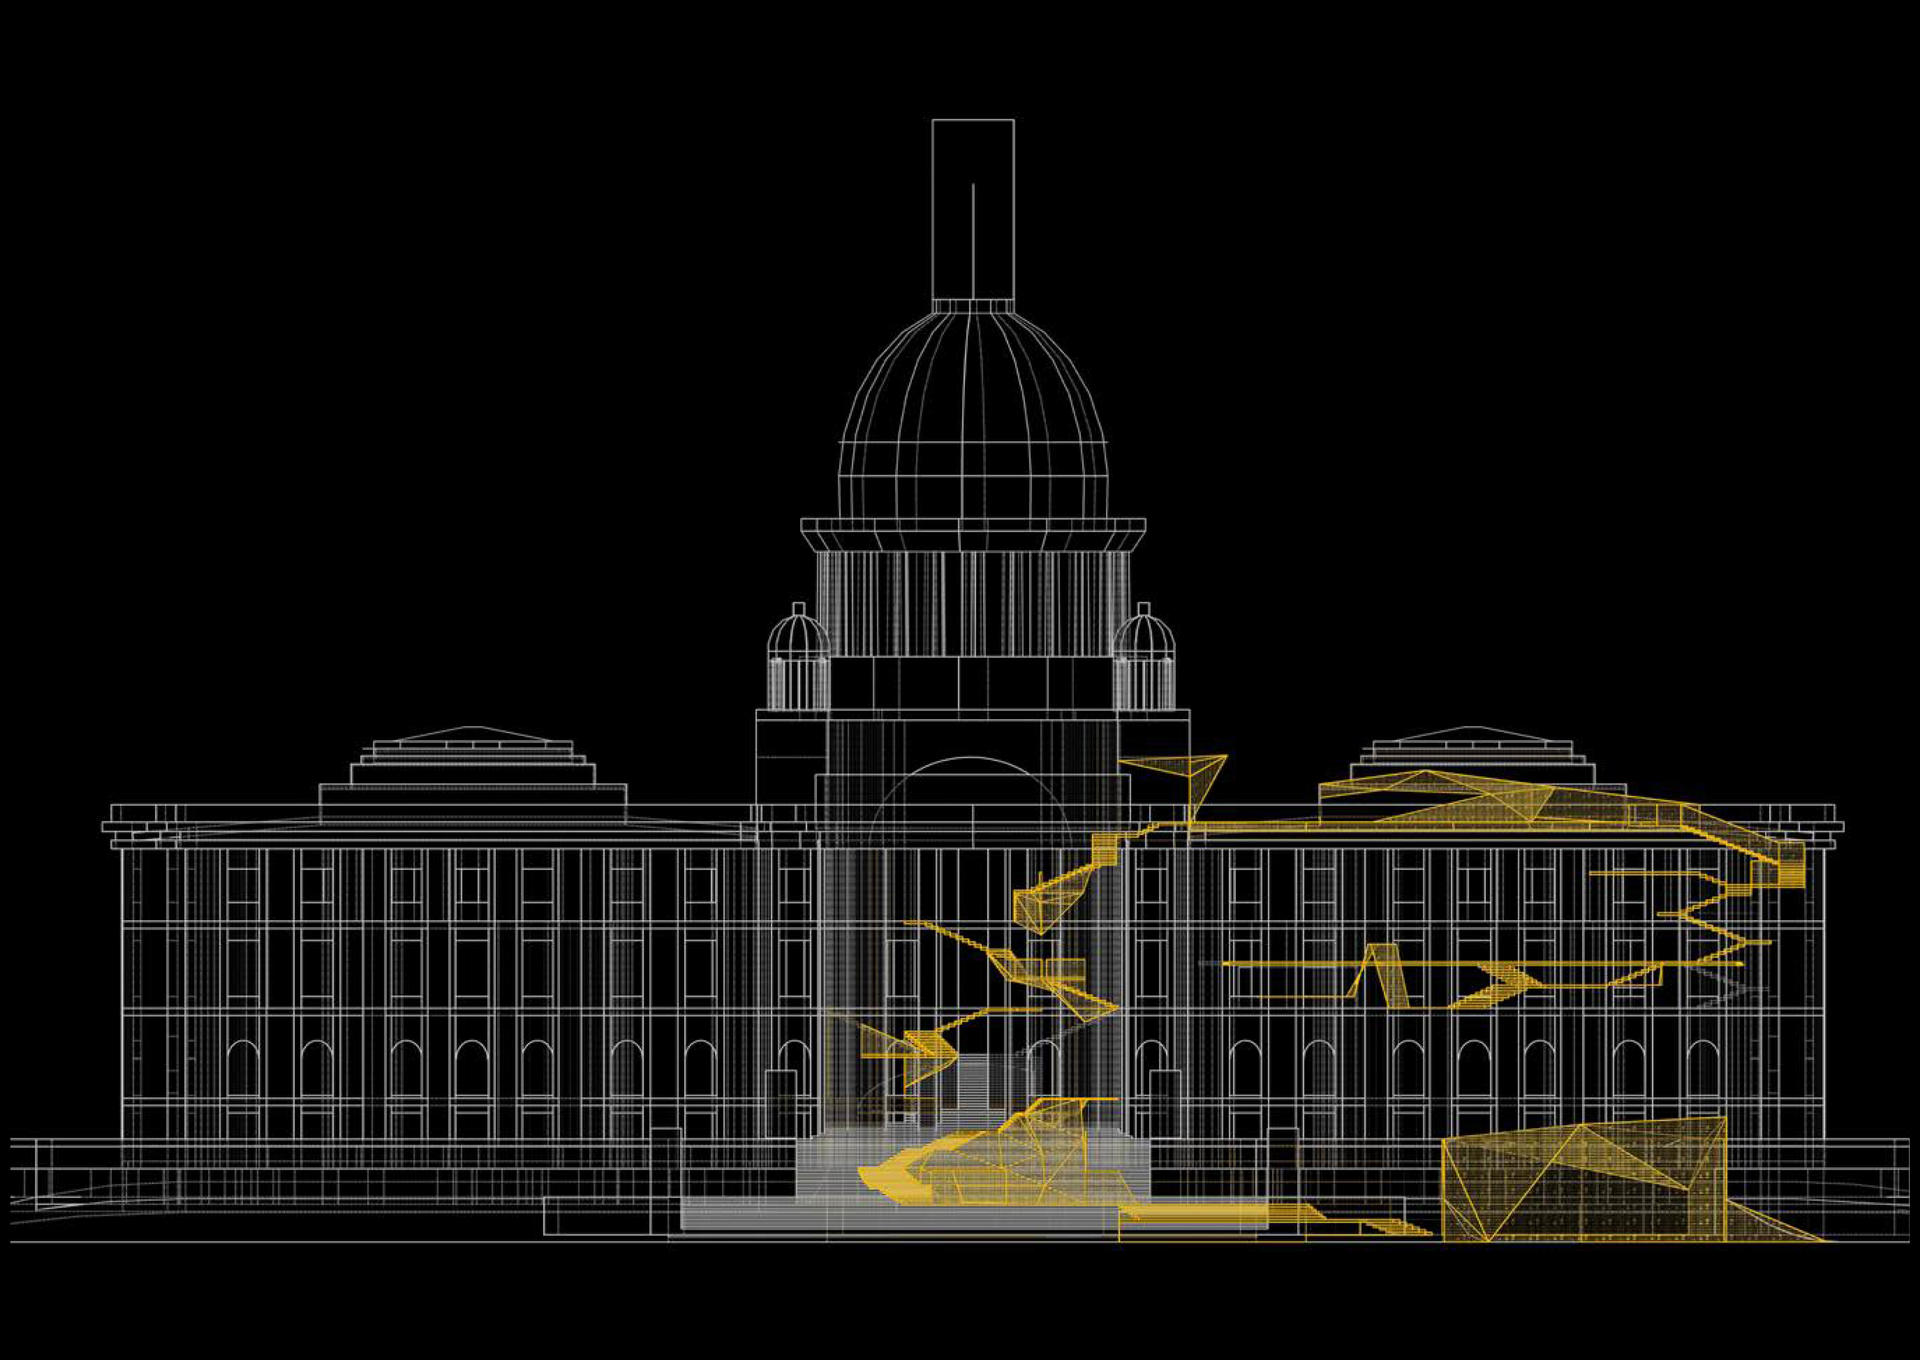  The State House of the 21st century incorporates a dynamic and multi-directional circulation system, and working and socializing spaces that enhance communication within.